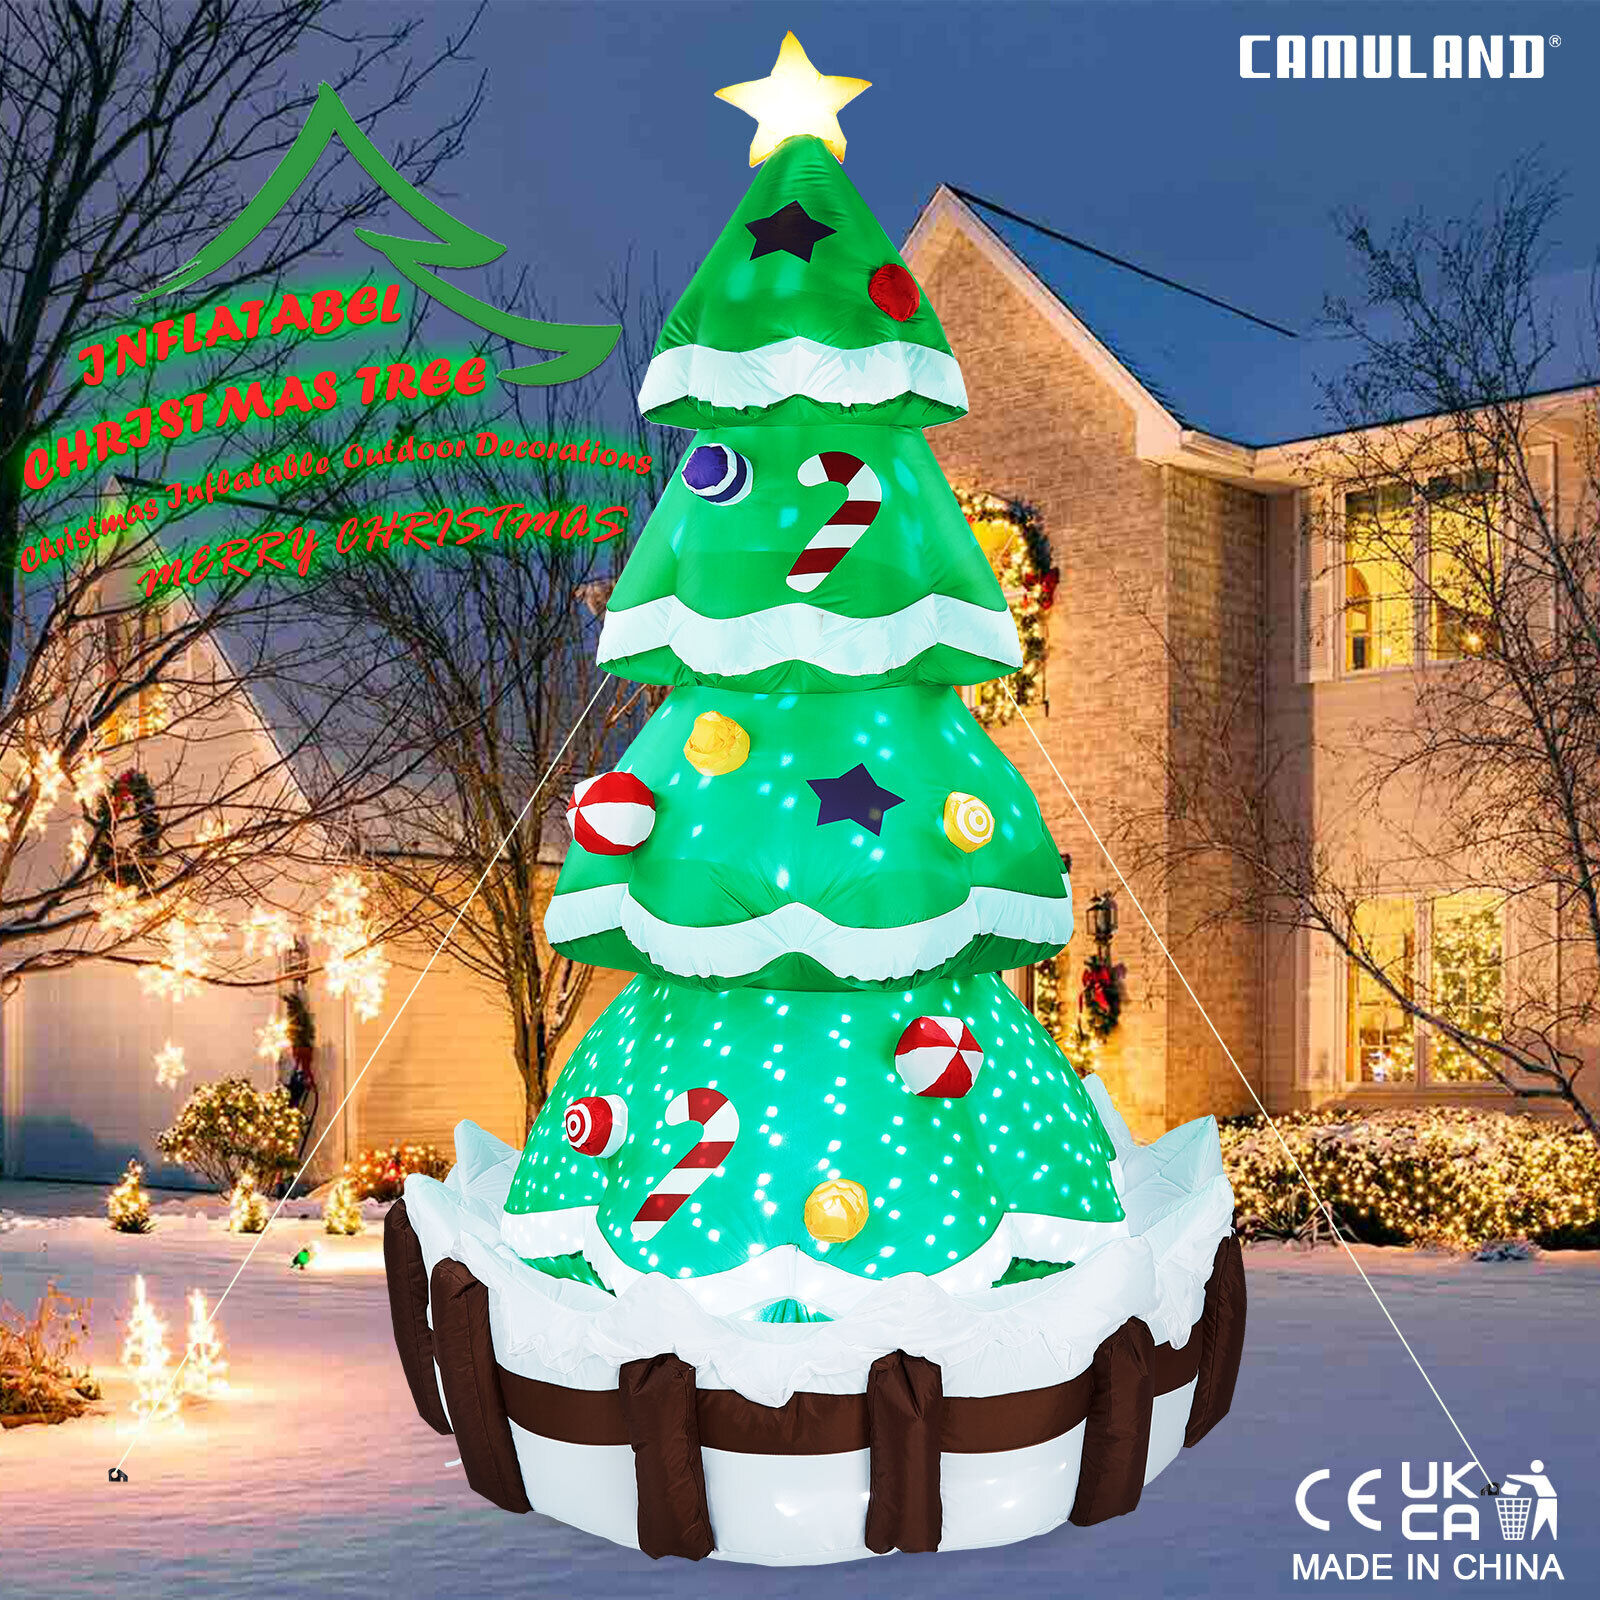 7FT Inflatable Christmas Tree Build in LED Light Outdoor Yard Garden Party Decor